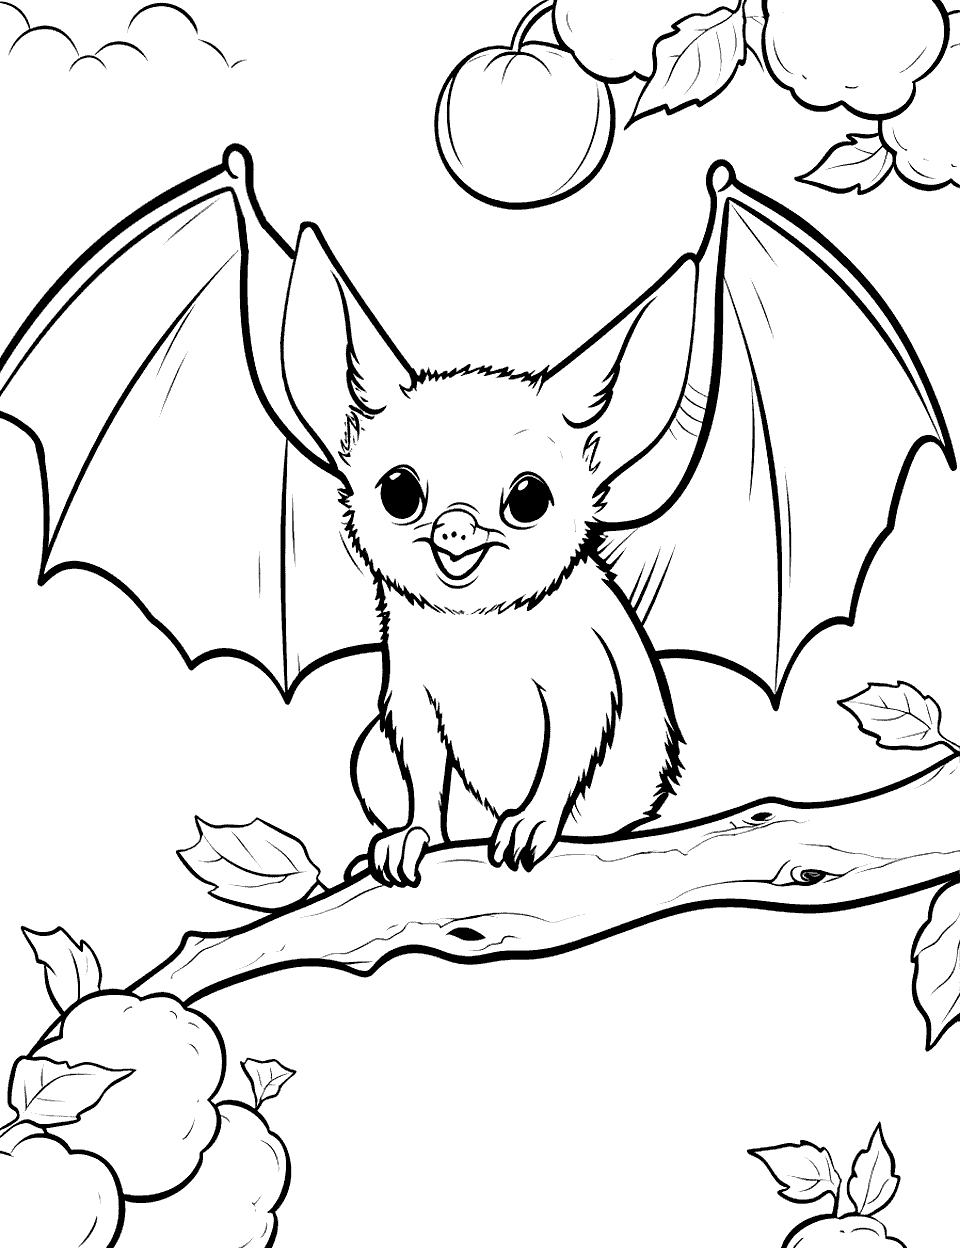 Fruit Bat Coloring Page - A happy fruit bat on a fruit tree looking for a fruit to eat.